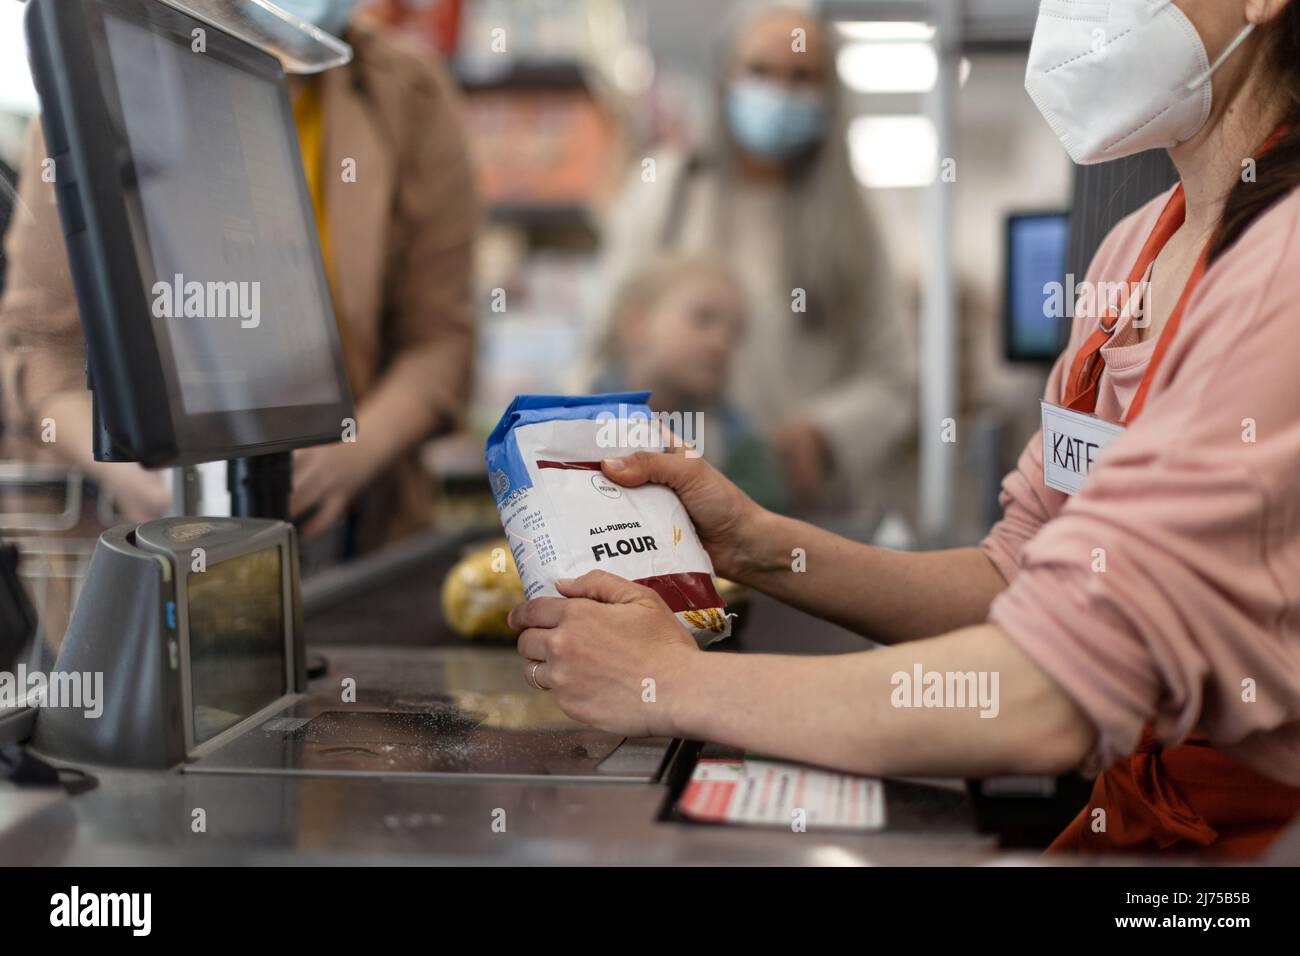 Checkout counter hands of the cashier scans groceries in supermarket. Stock Photo